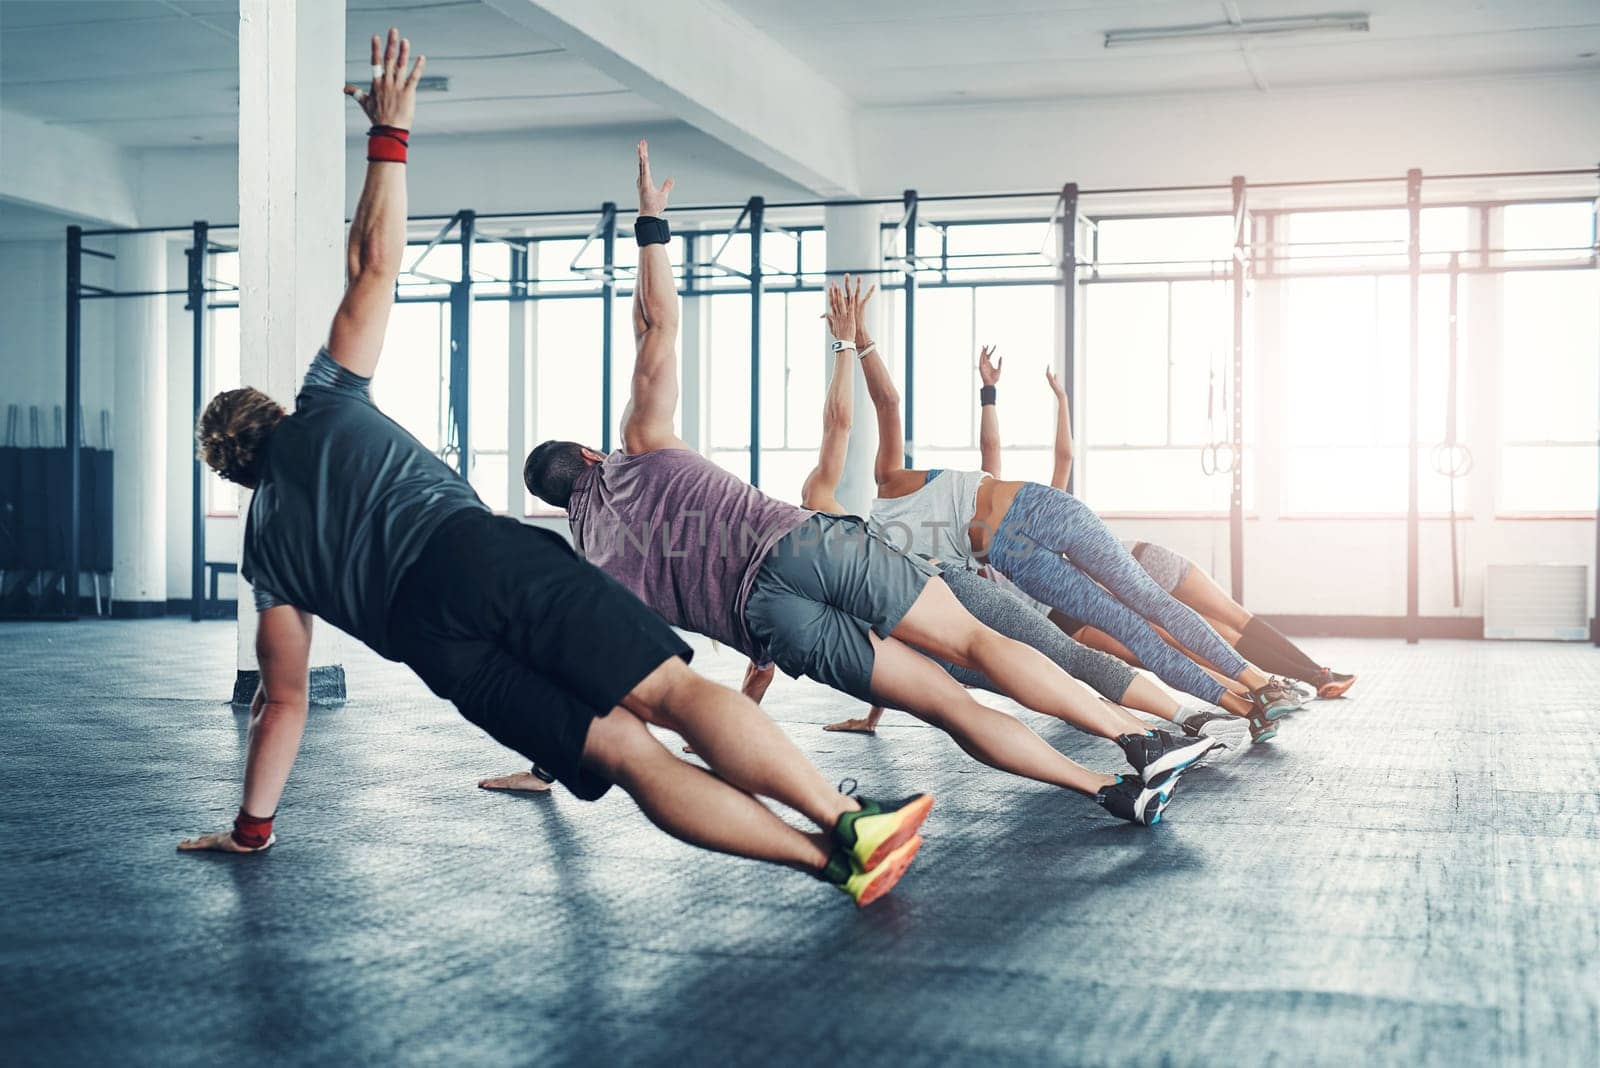 Fitness, group class and athletes doing a exercise in the gym for health, wellness and flexibility. Sports, training and people doing side plank exercise challenge together in sport studio or center. by YuriArcurs